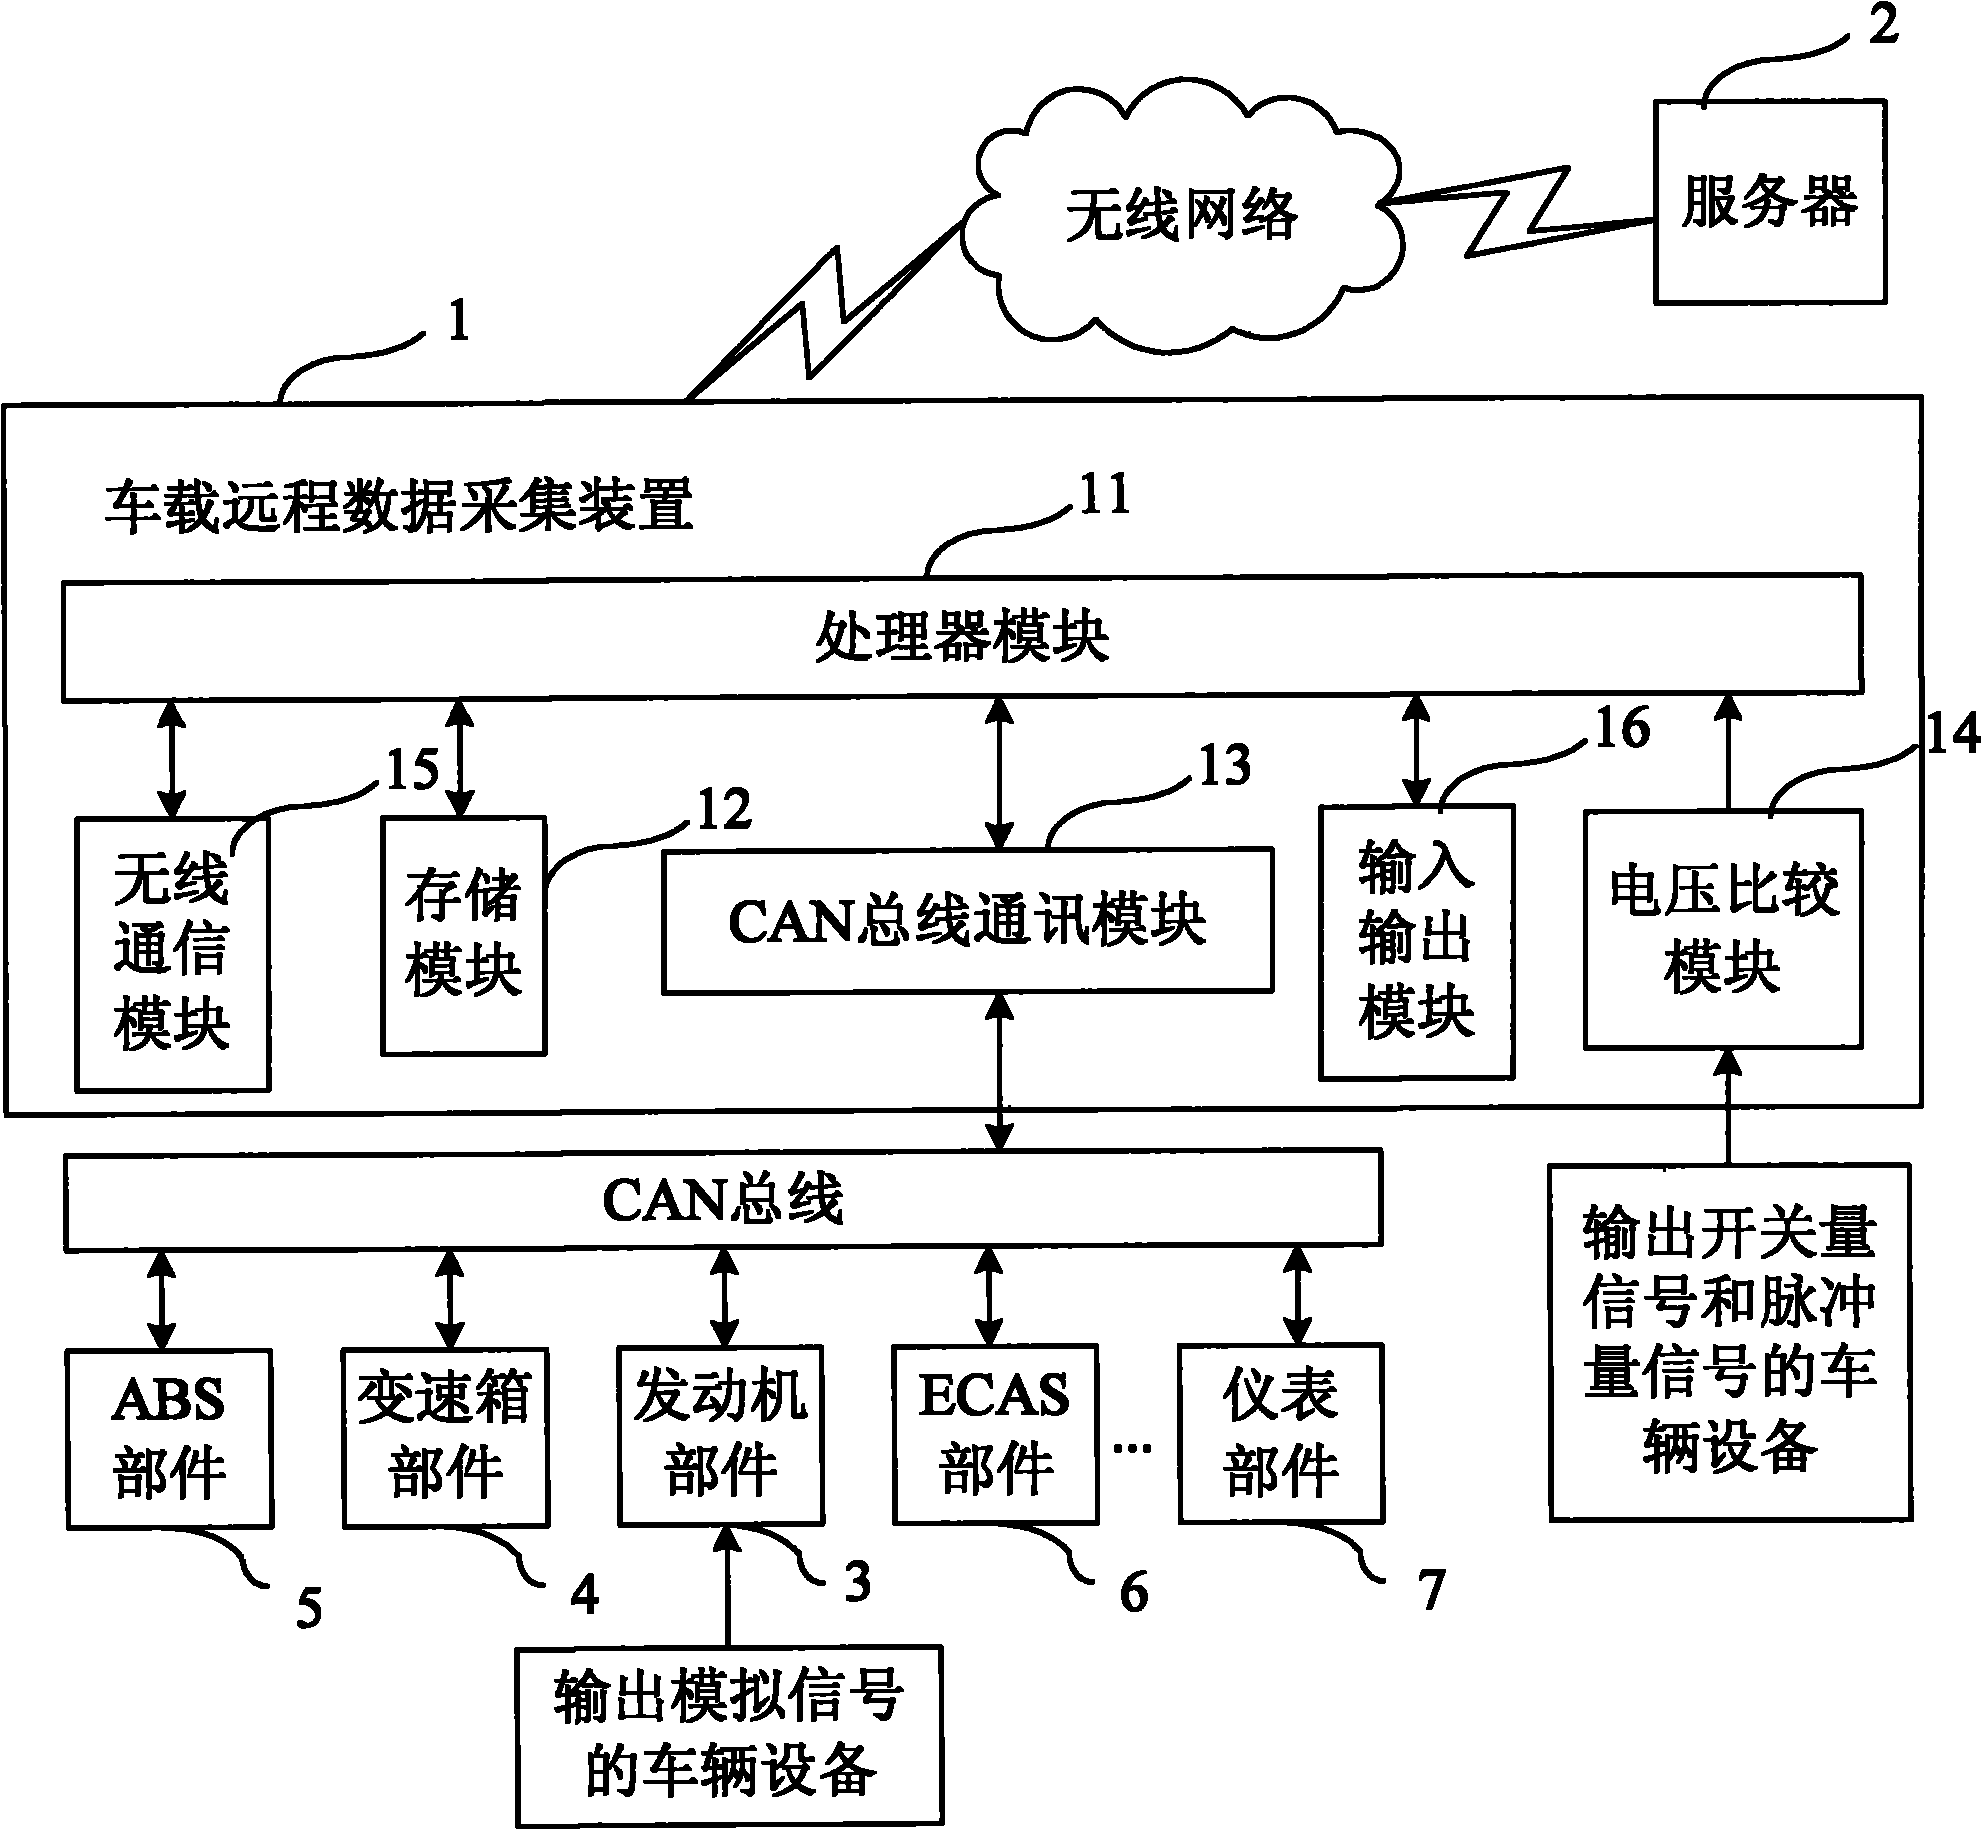 Vehicle remote data acquisition system based on CAN (Controller Area Network) bus